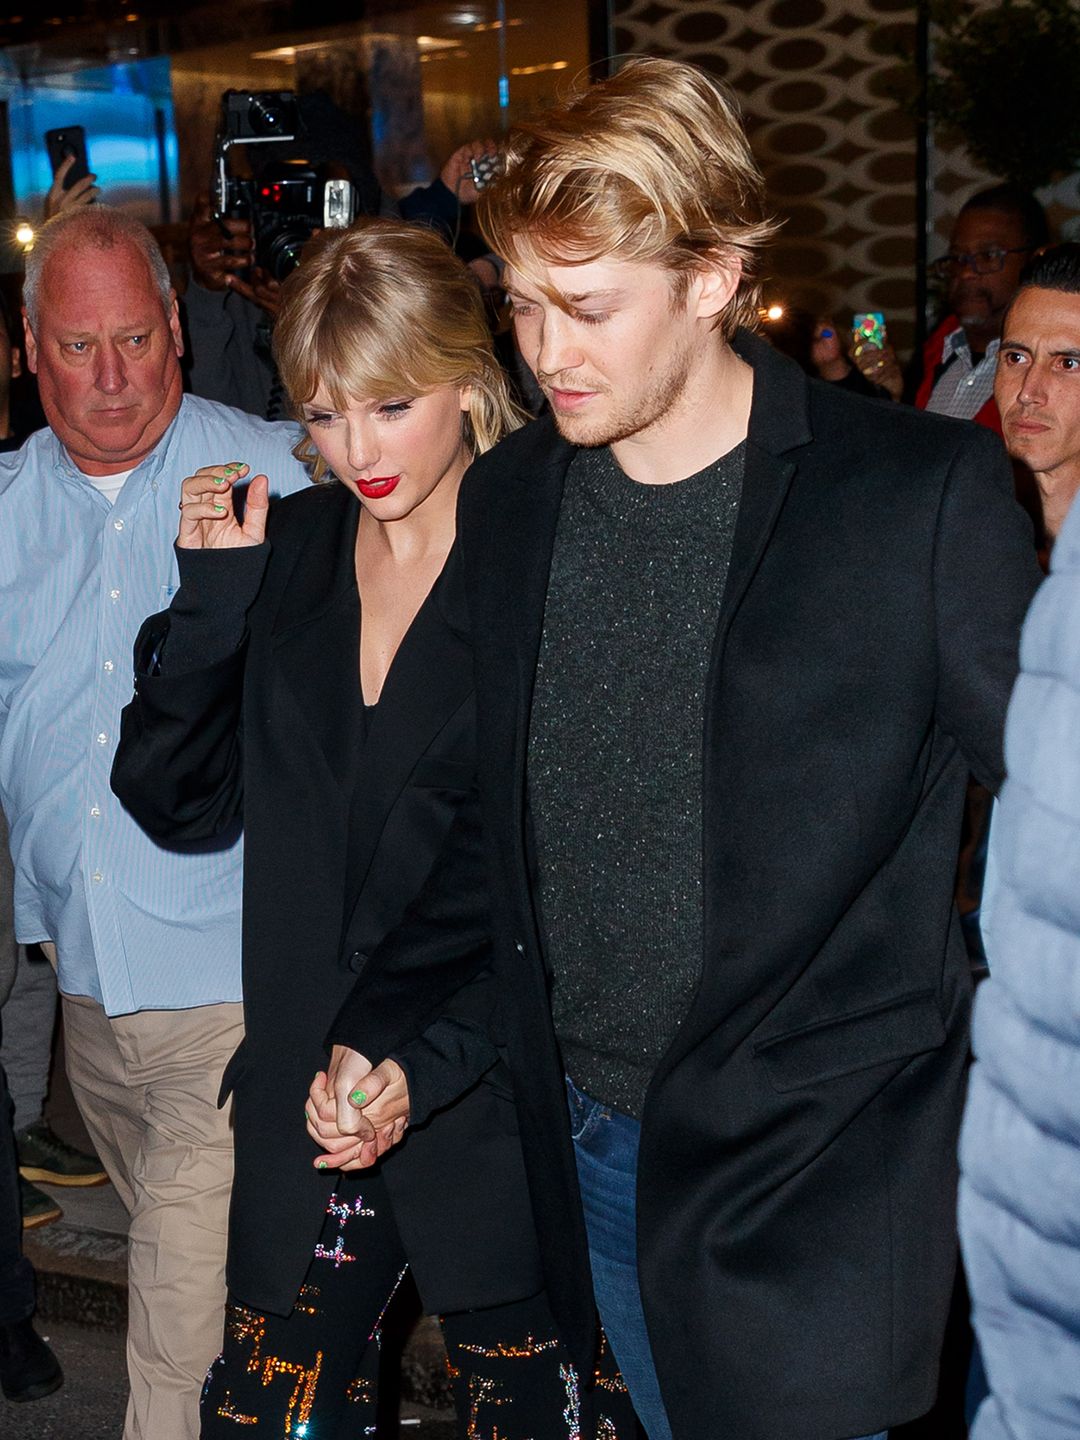 Taylor and Joe walking through a crowd with security around them, keeping their heads angled down, they are holding hands